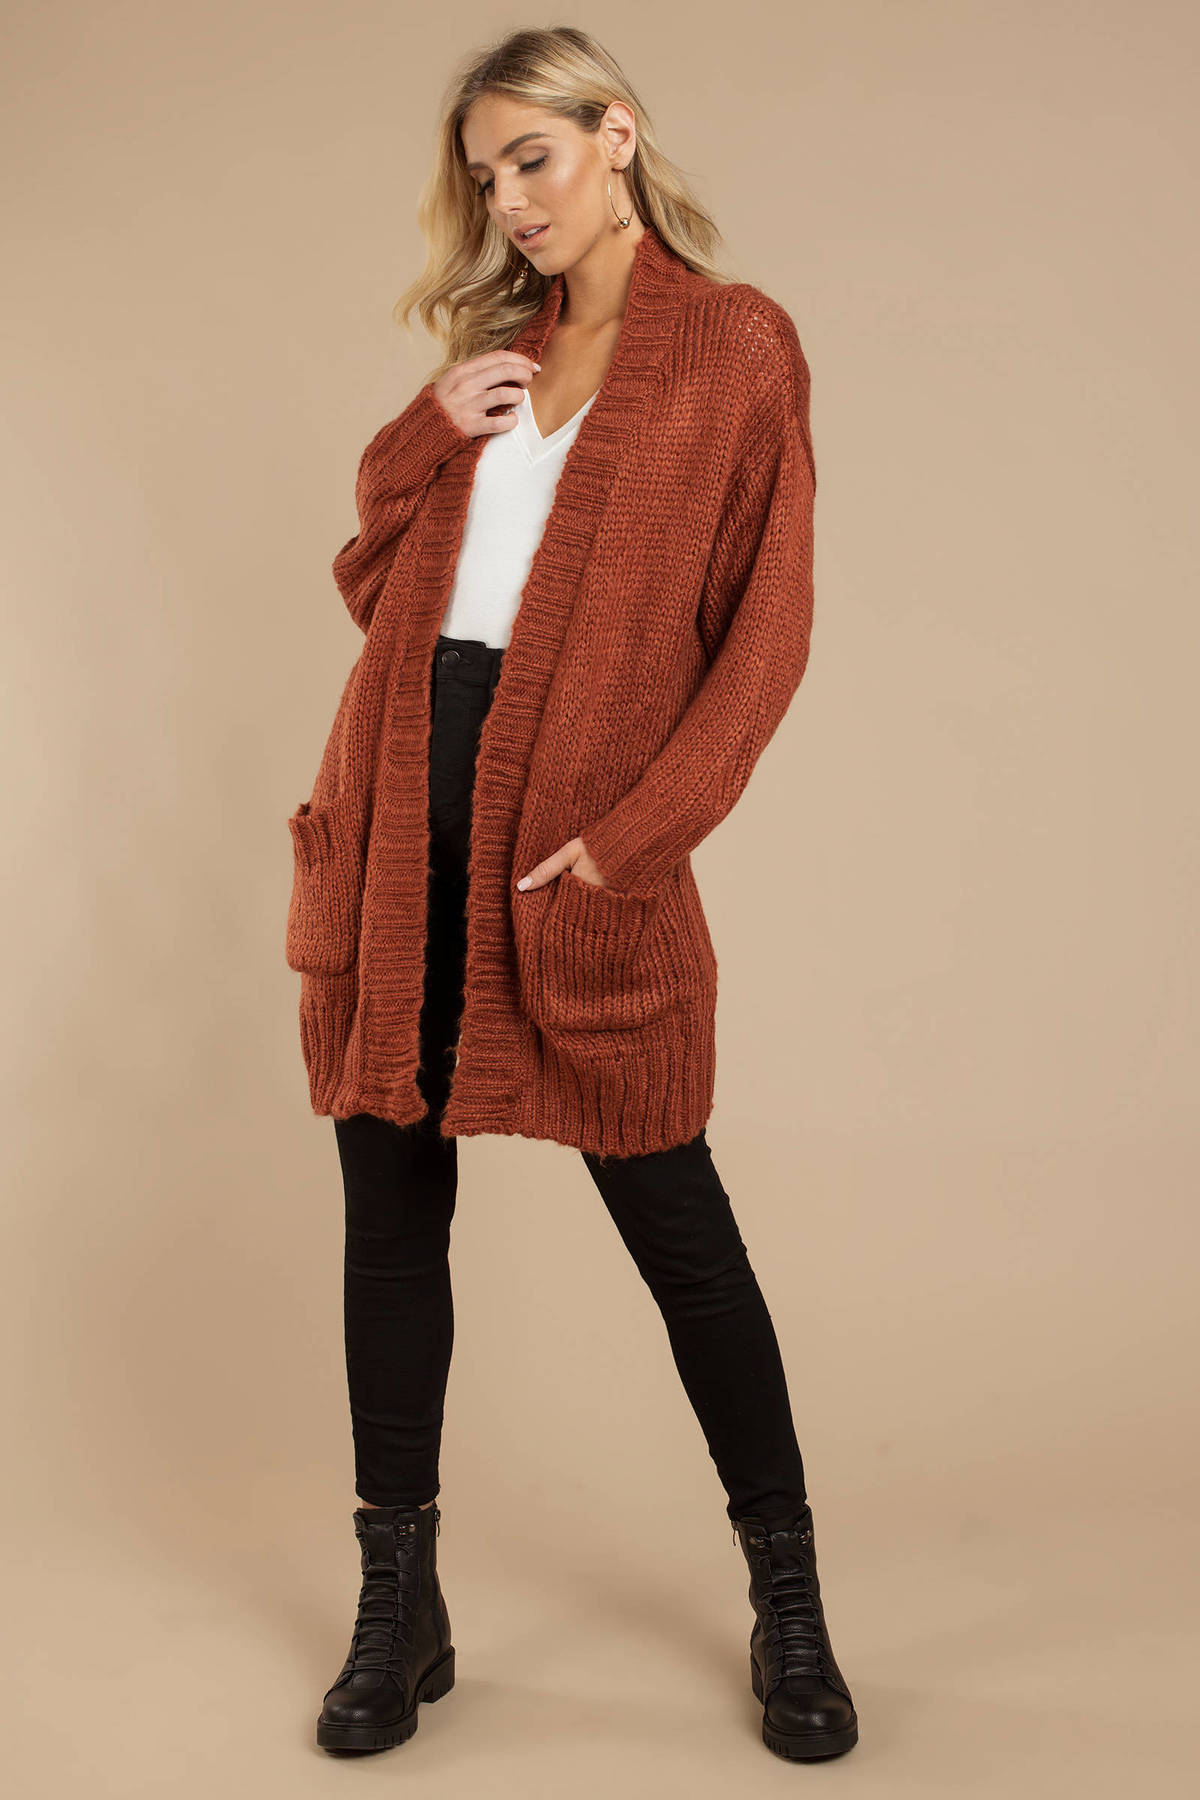 Red Cardigan - Cable Knit Cardigan - Red Oversized Cardigan